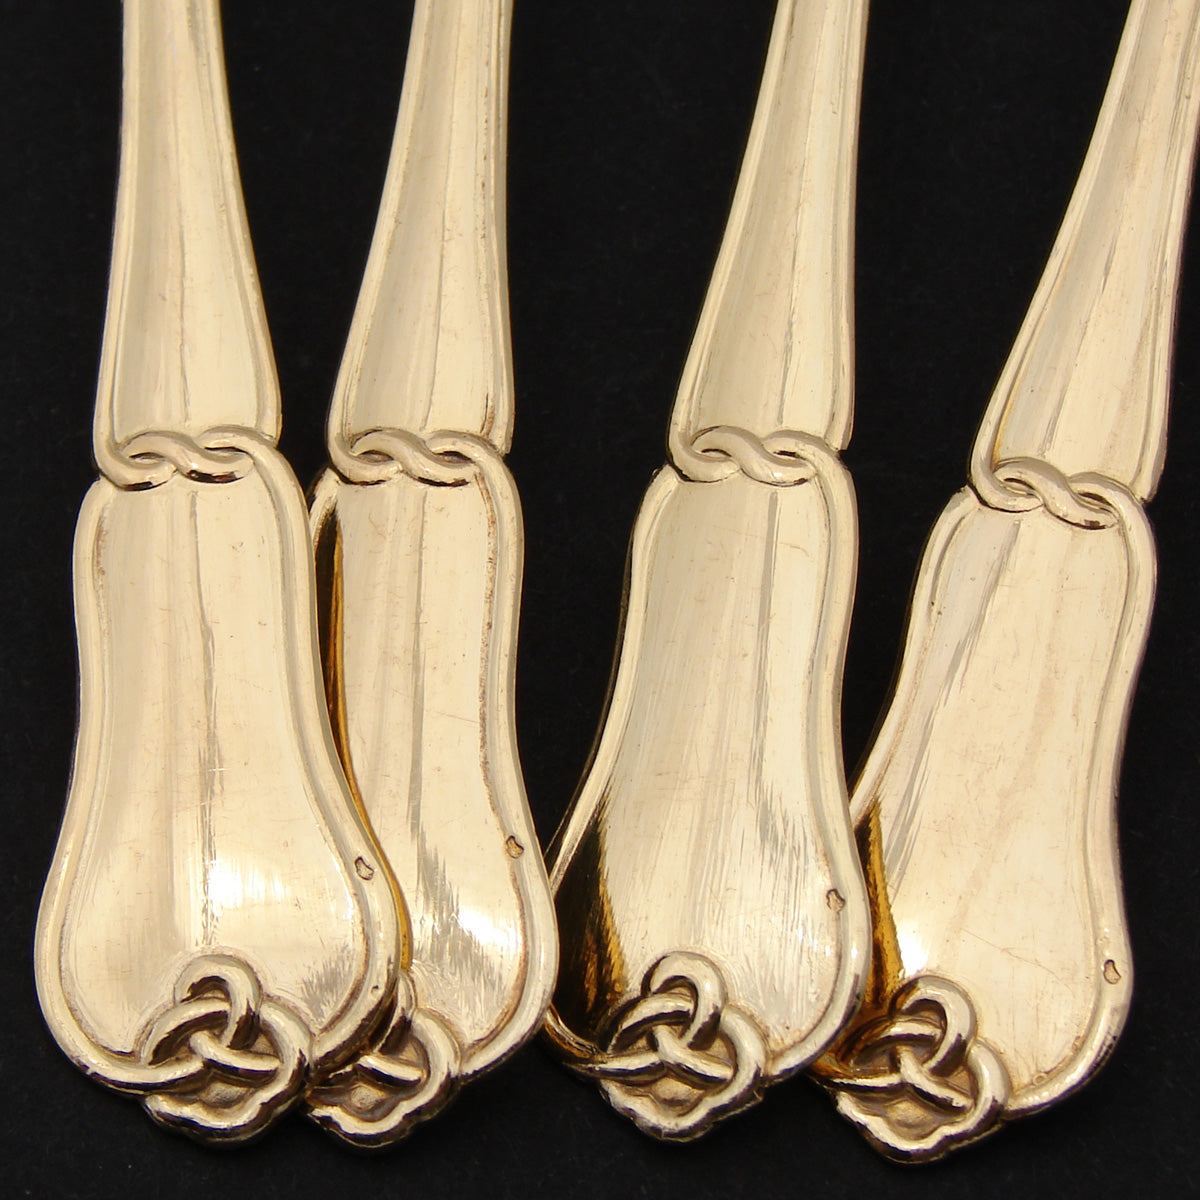 Antique French Hallmarked 18k Gold on Silver Vermeil 12pc Teaspoon, Tongs, Strainer & Scoop Set, Boulle Style Brass Inlay Box